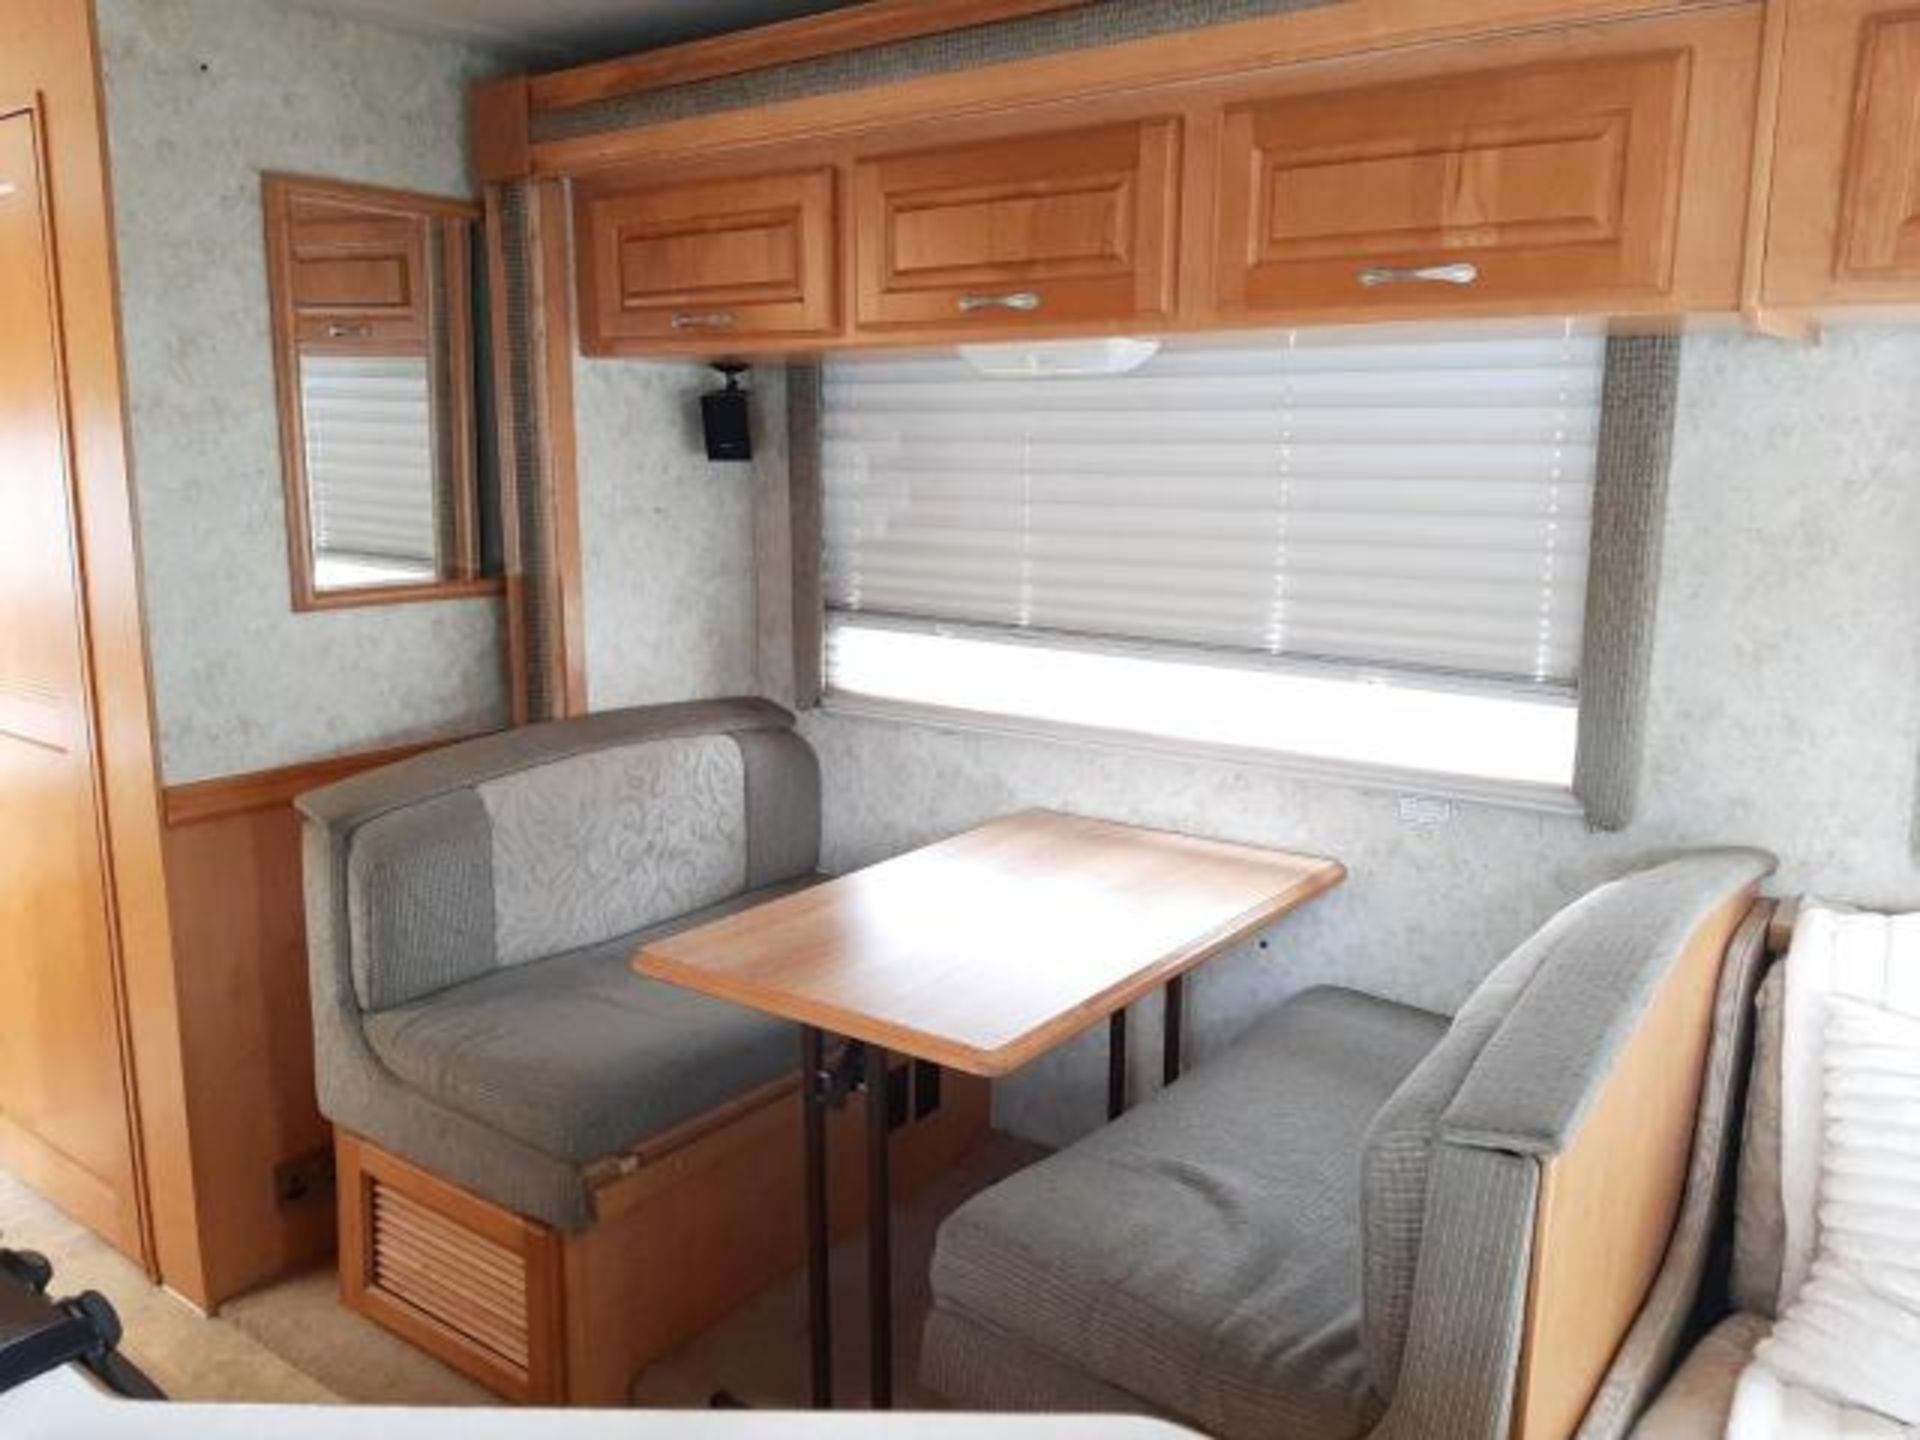 FORD E450 FOURWINDS RV 7 BERTH LHD MOTORHOME, VERY LOW MILEAGE 34,453 MILES *NO VAT* - Image 9 of 13